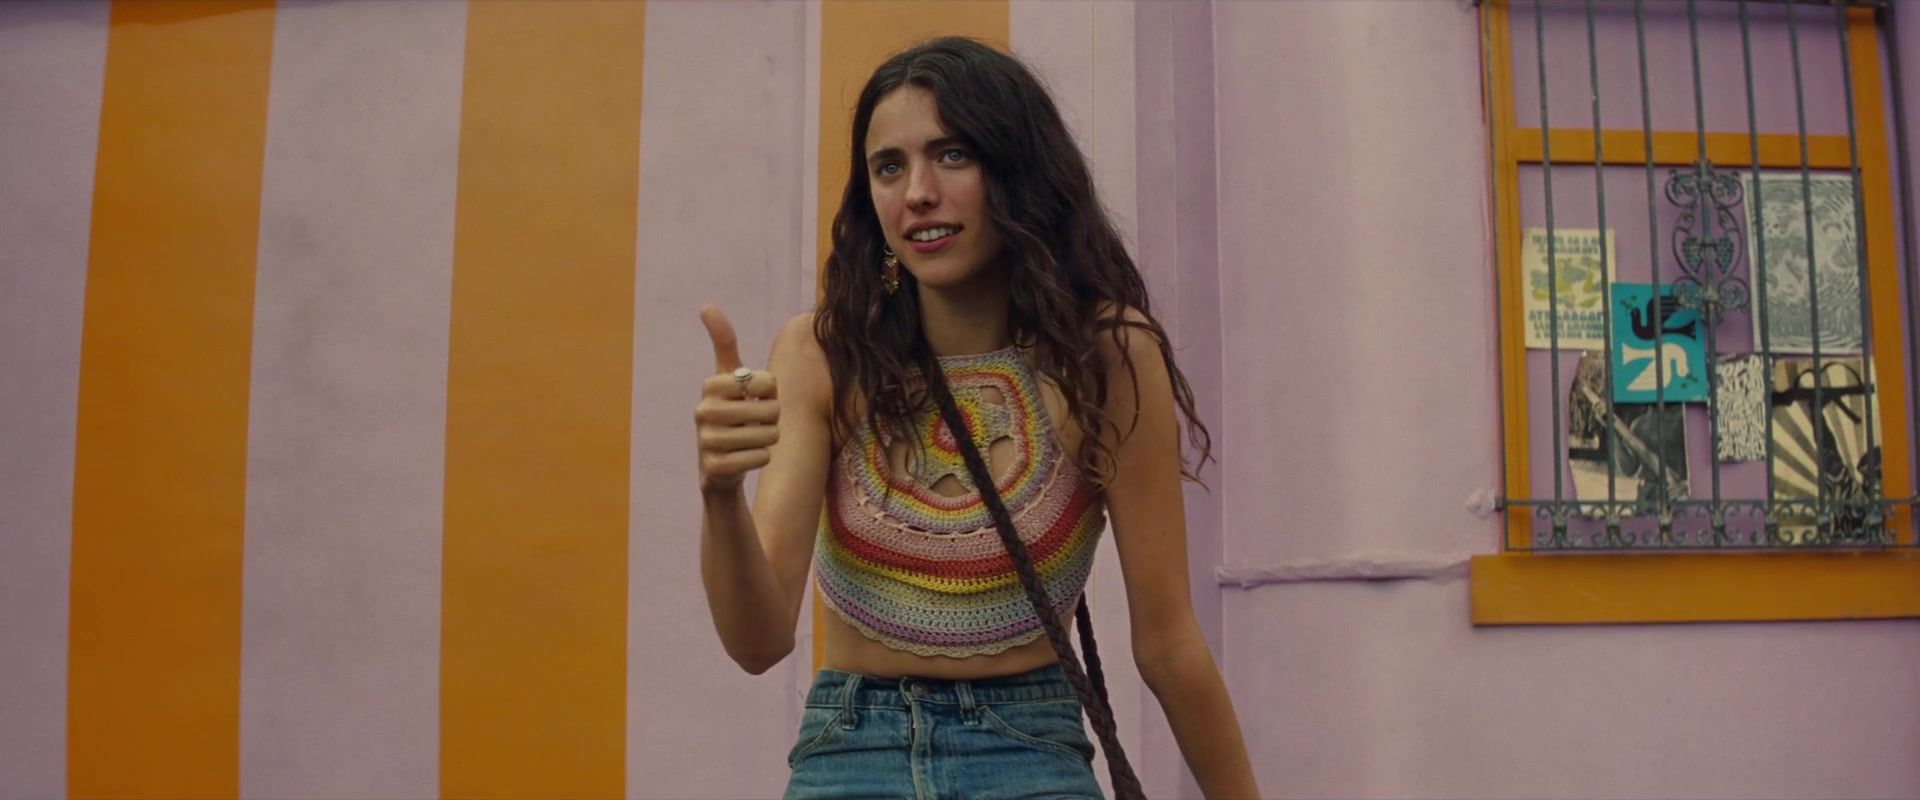 Striptease Sexy Dakota Fanning, Margaret Qualley naked- Once Upon A Time In Hollywood (2019) Salope